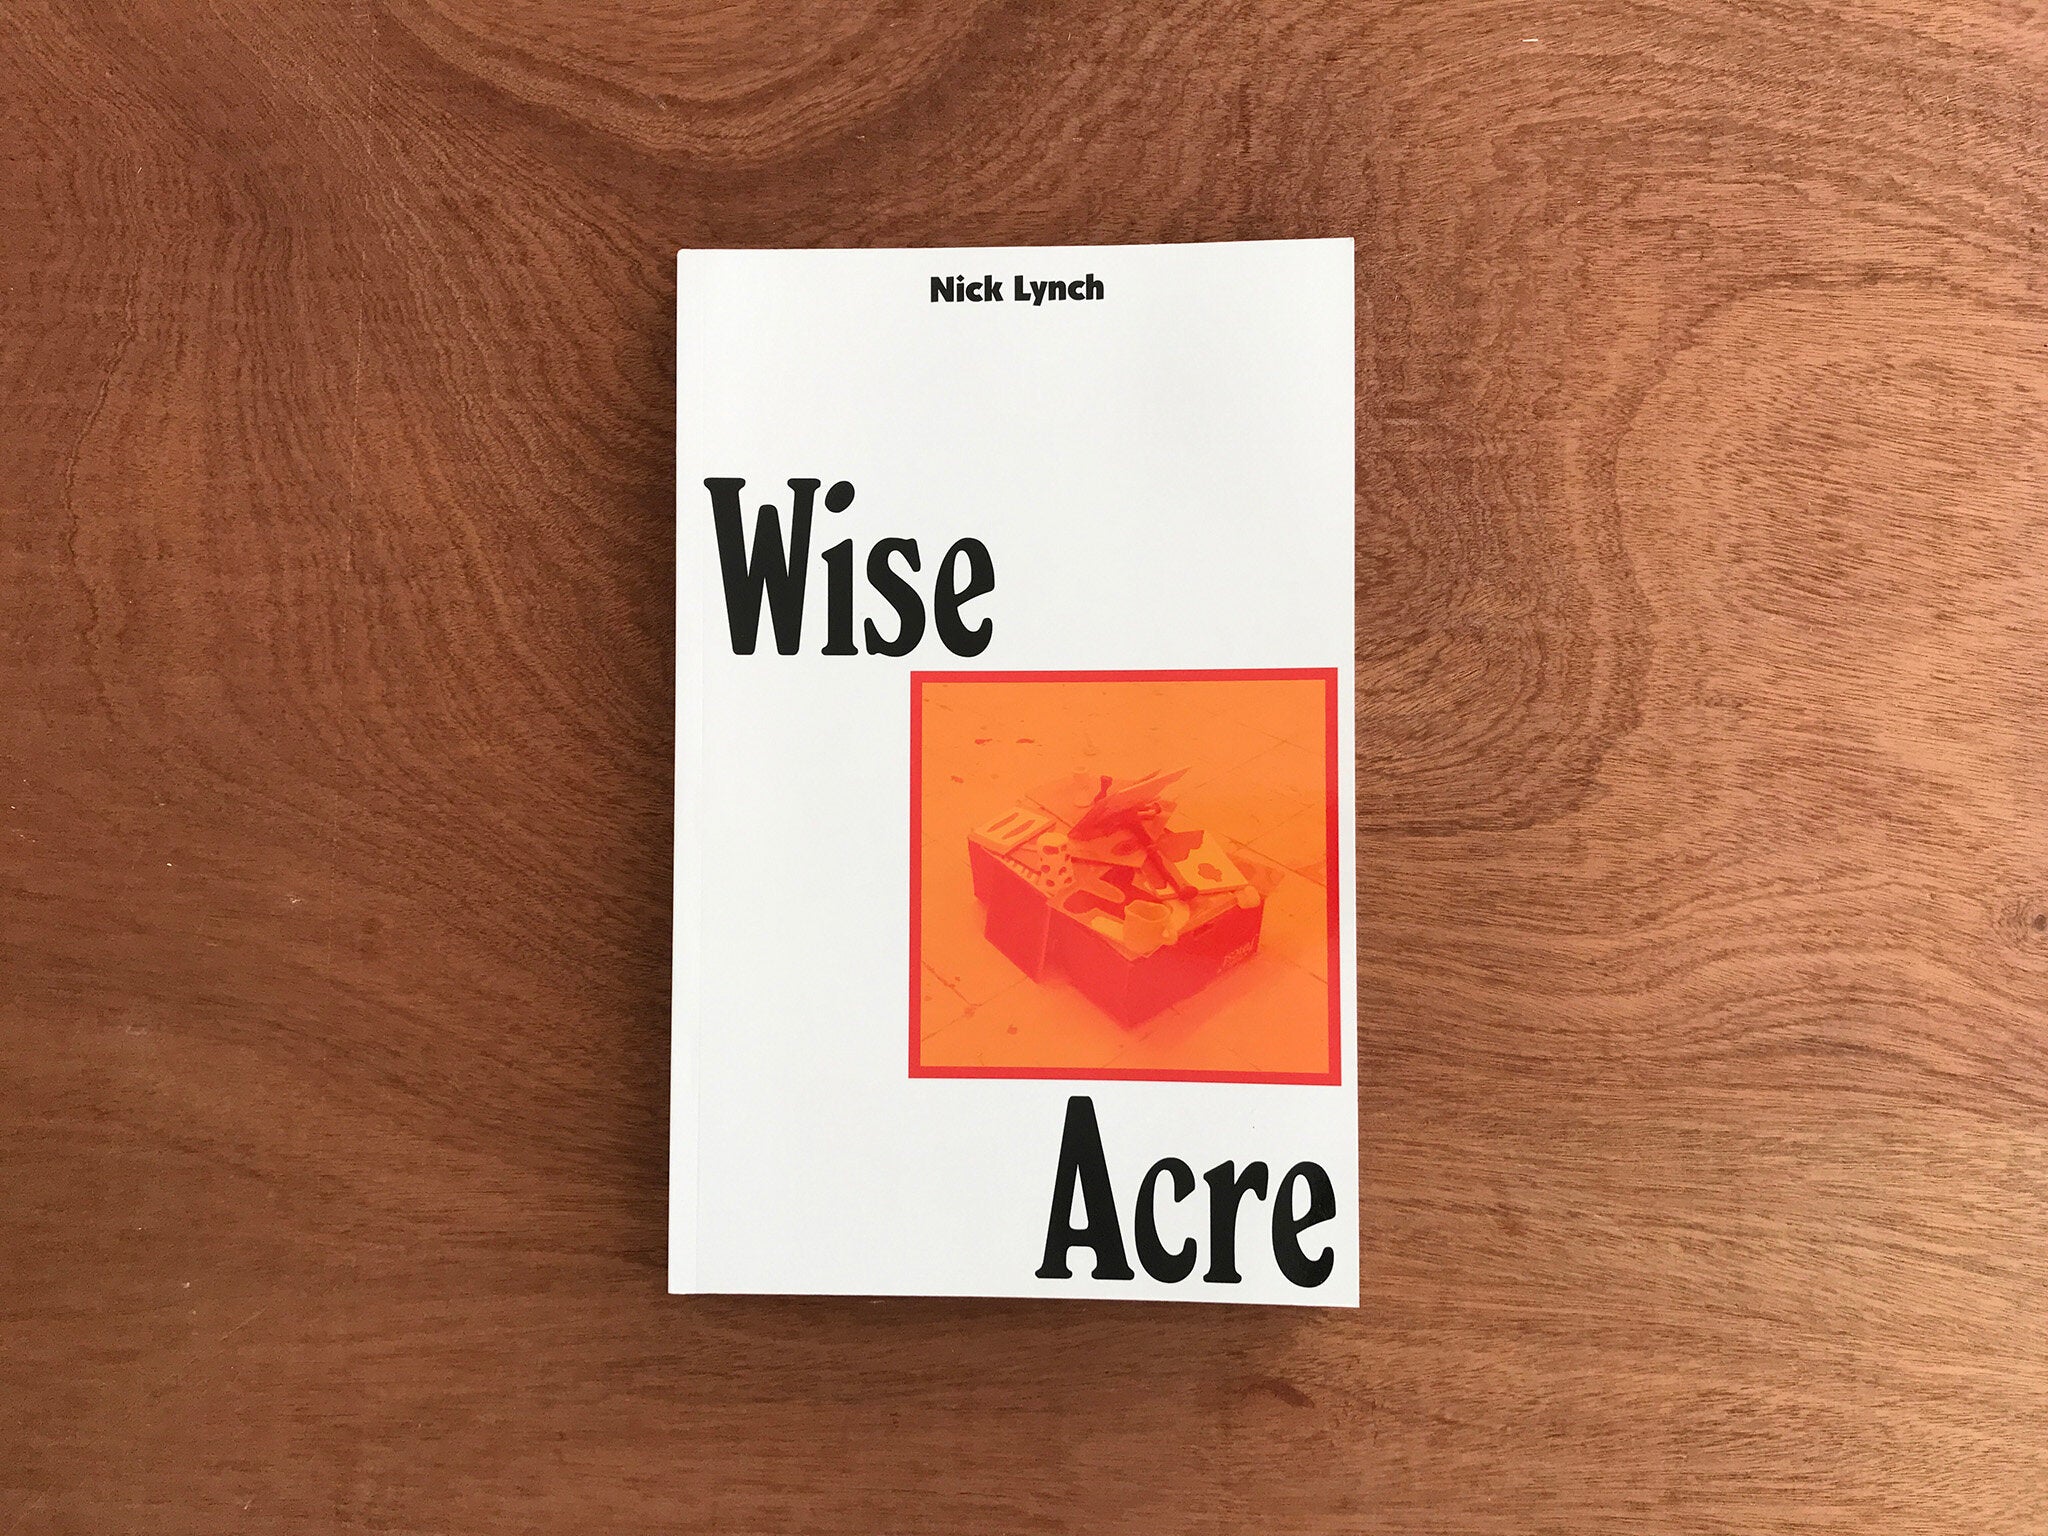 WISE ACRE by Nick Lynch